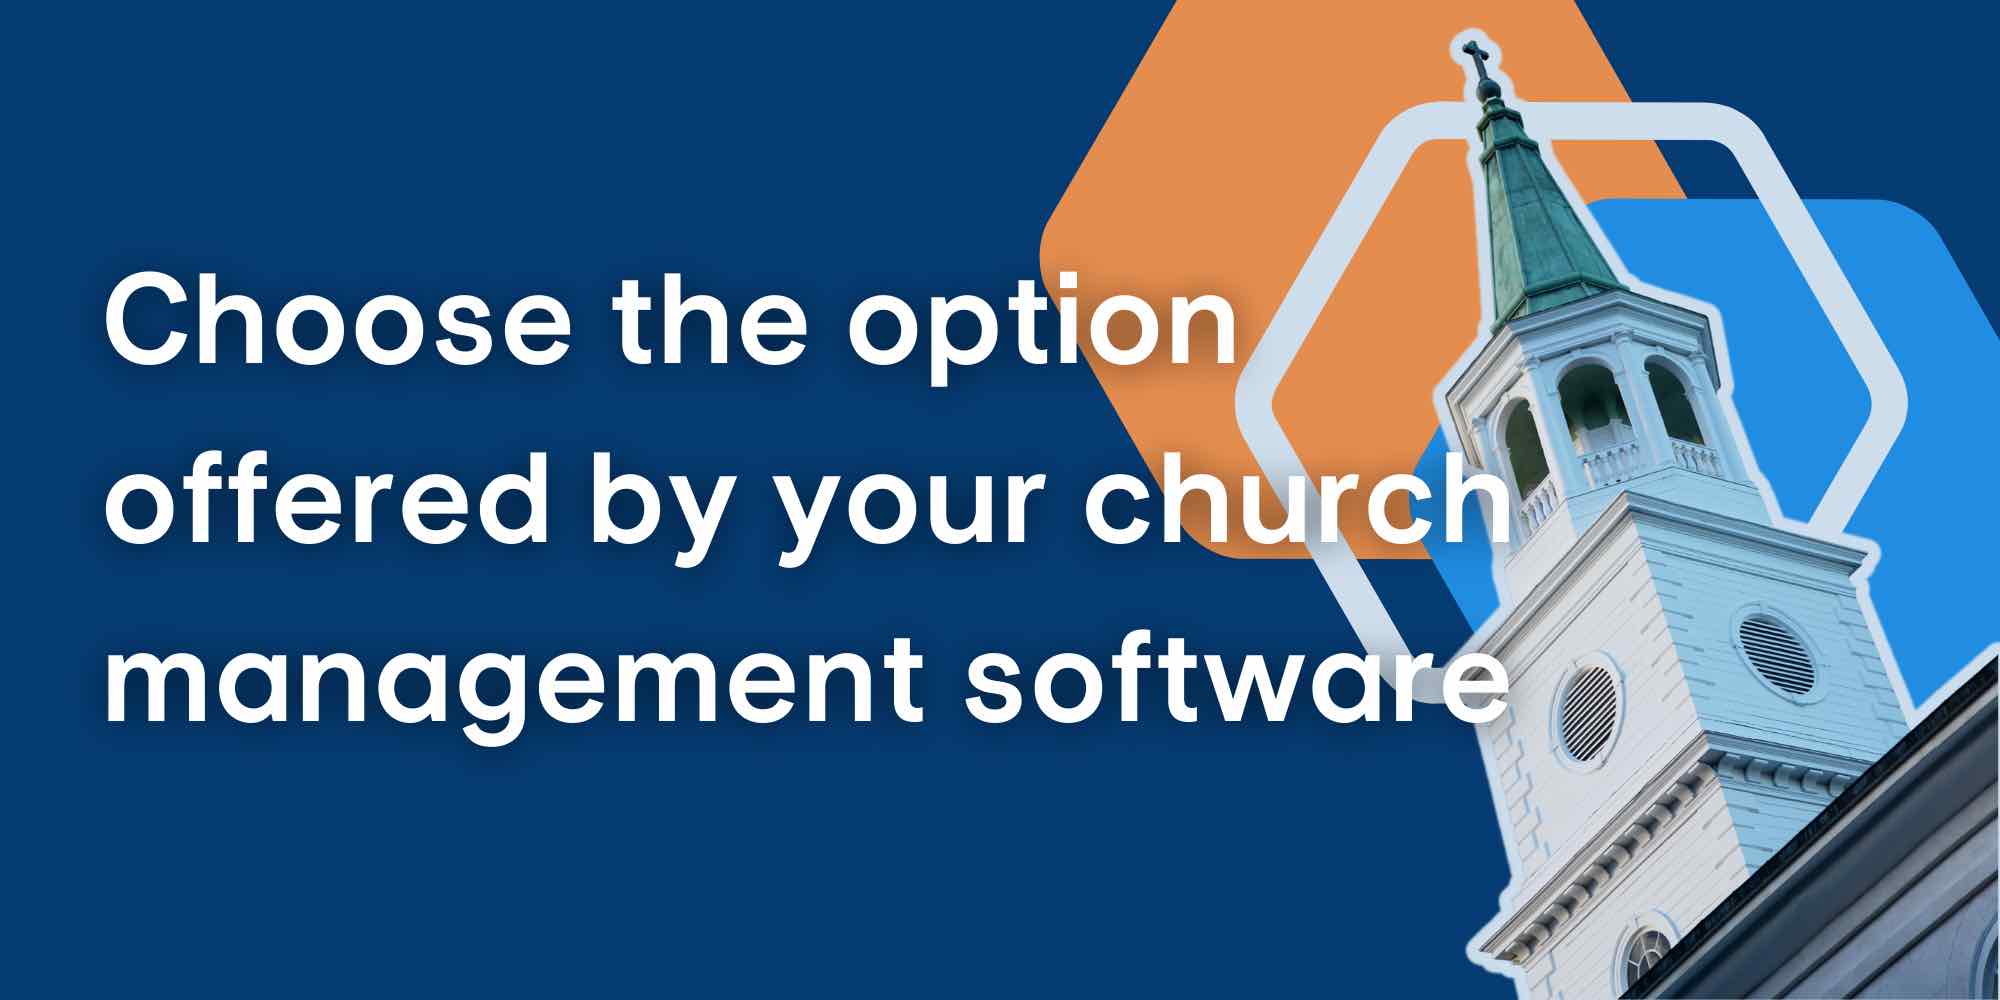 Use your church management software to create your app